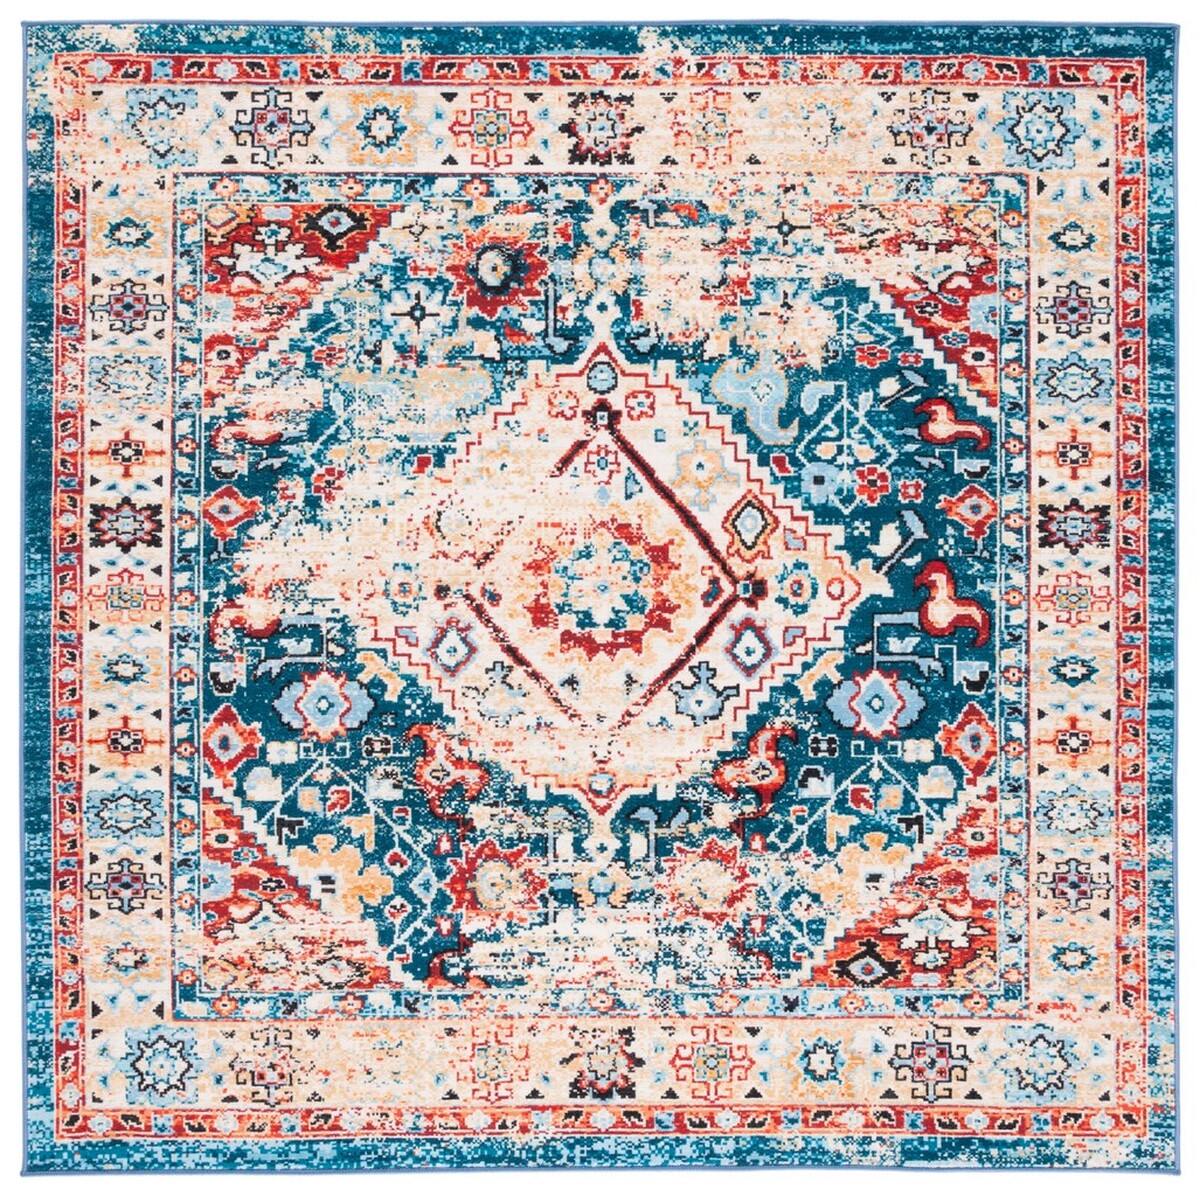 RIV157M-7SQ 6 ft. 7 in. x 6 ft. 7 in. Riviera 157M Power Loomed Square Area Rug, Blue & Gold -  Safavieh